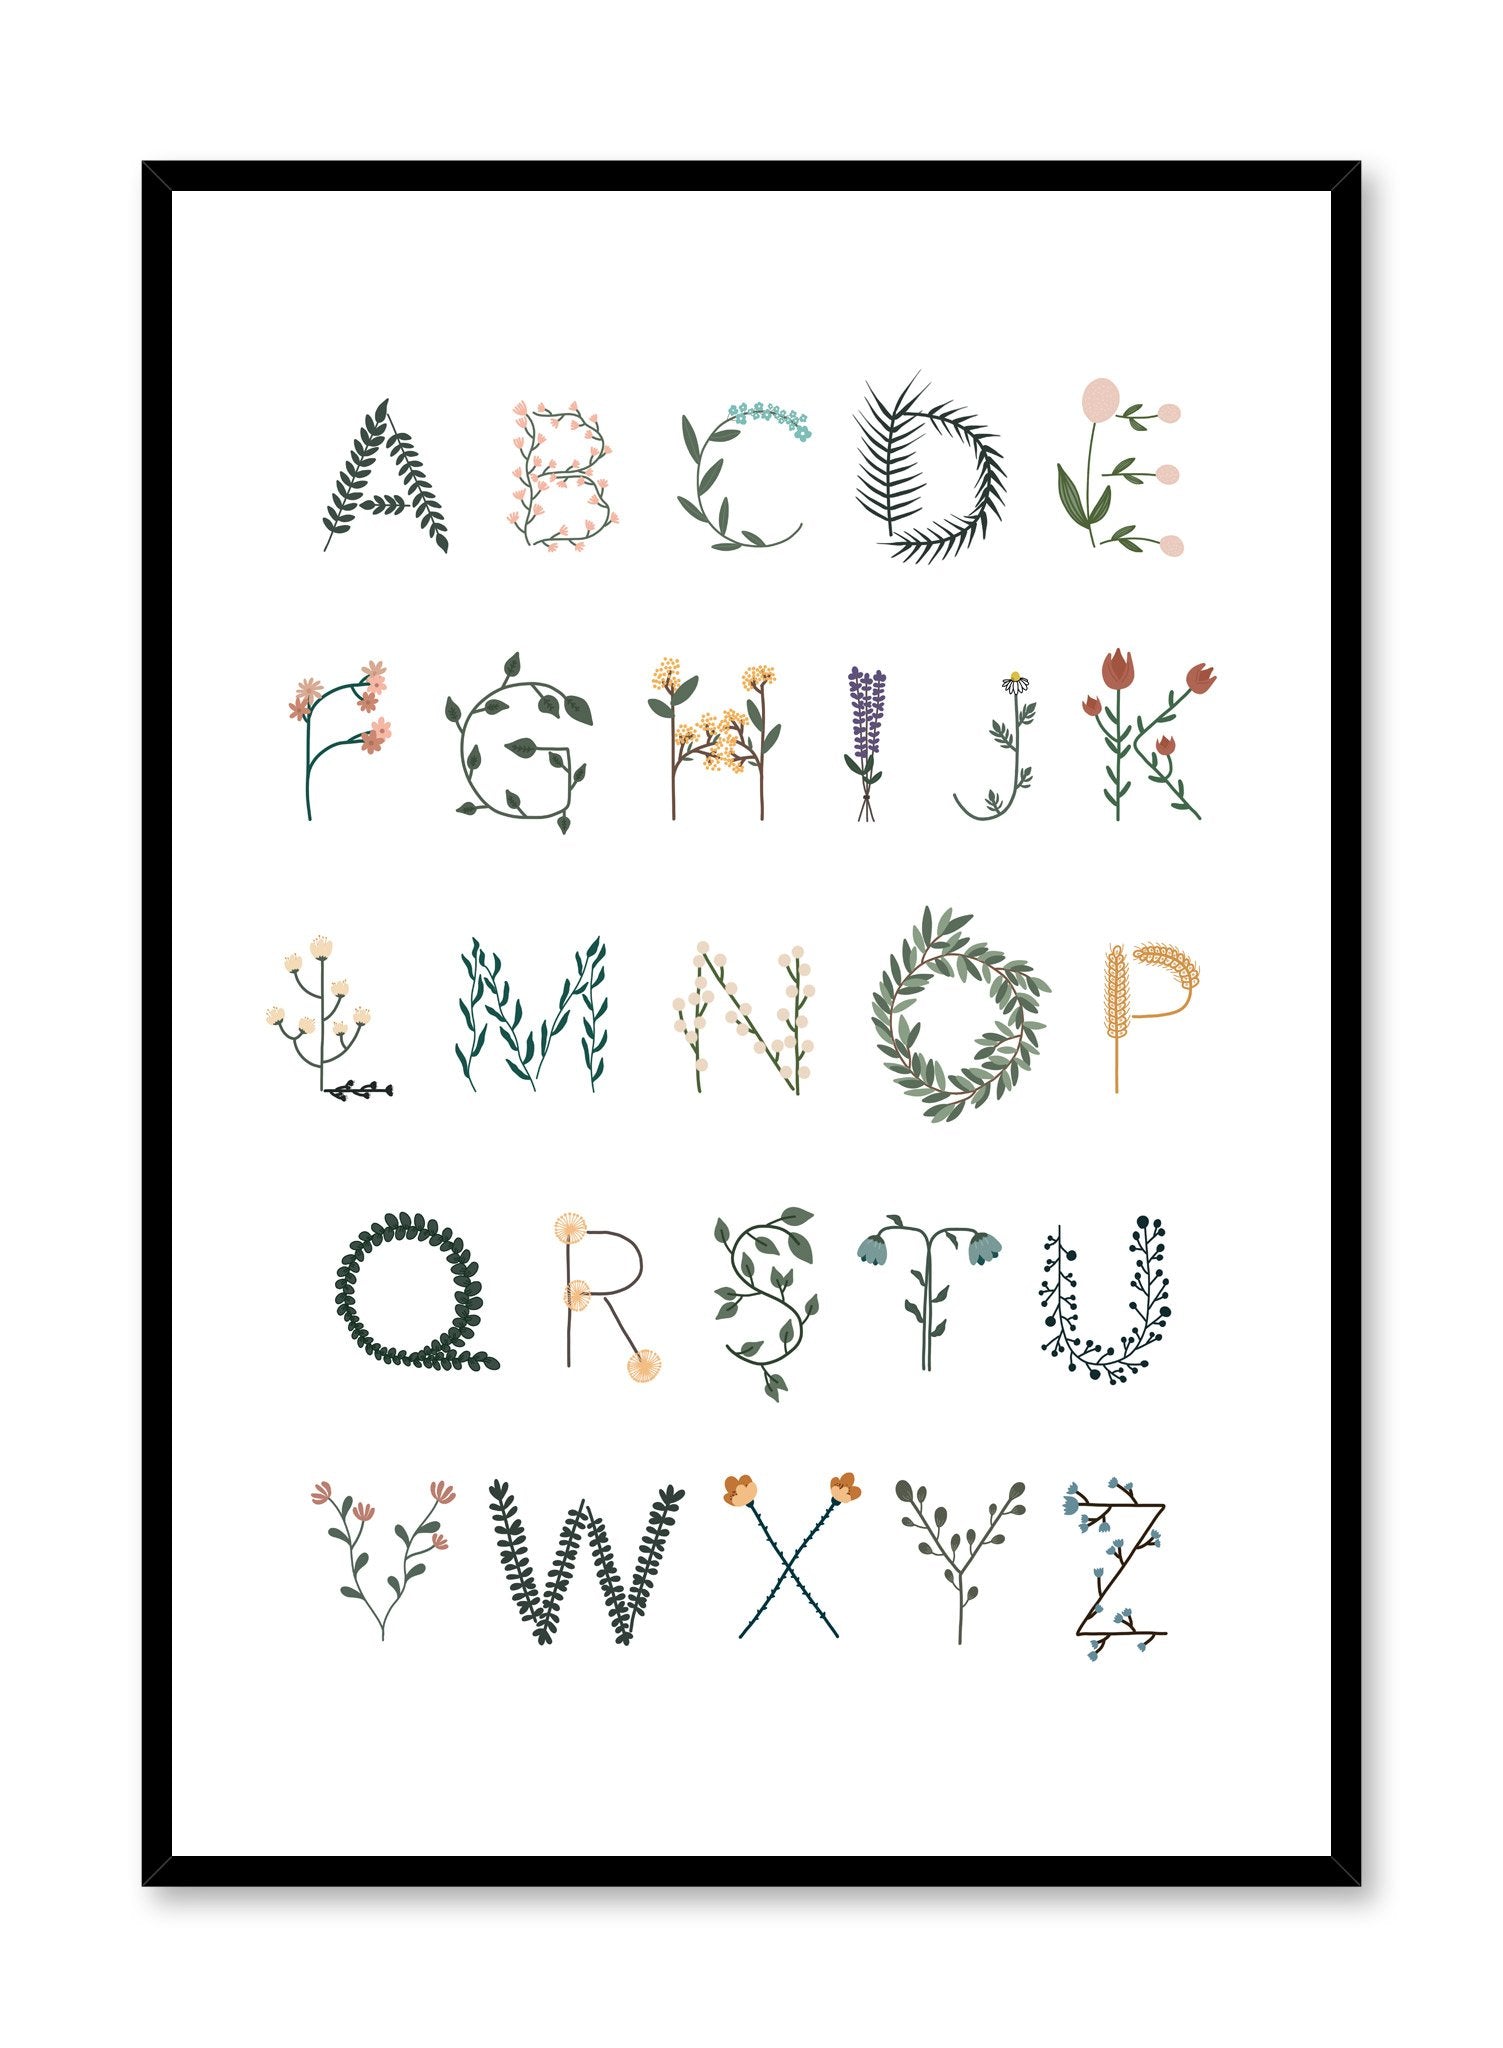 Modern minimalist typography poster by Opposite Wall with Alphabet in Flowers